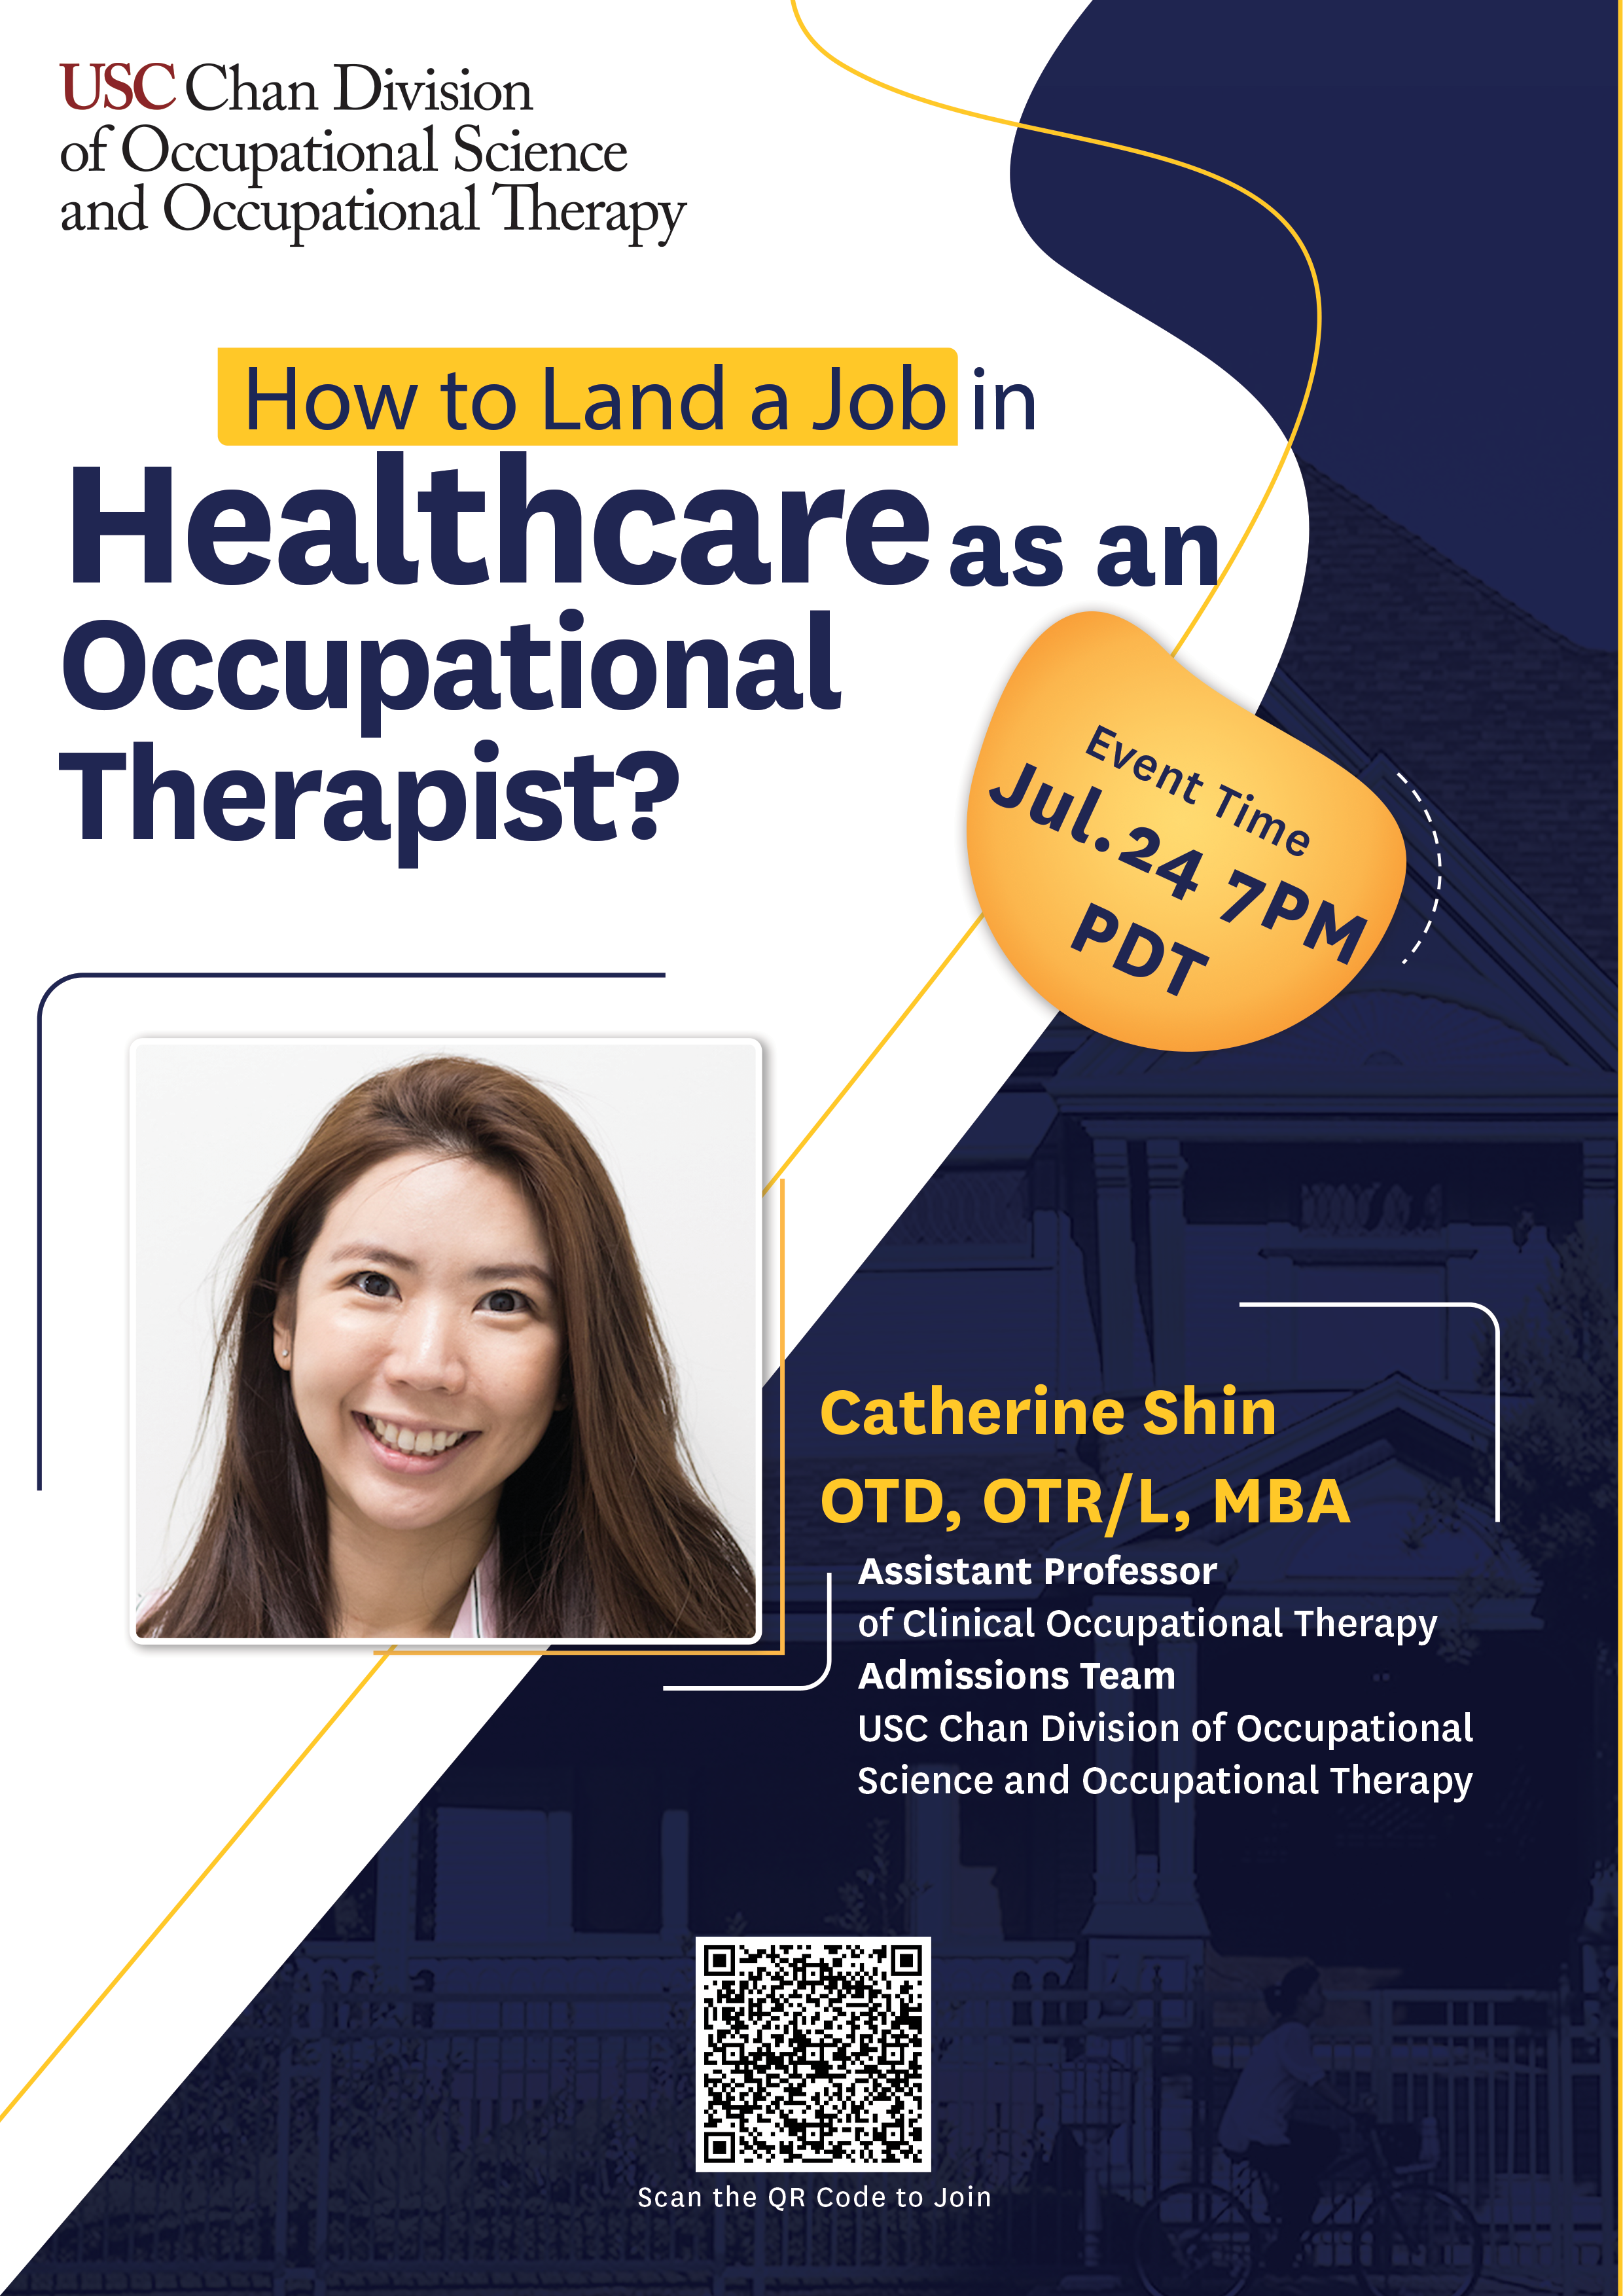 How to Land a Job in Healthcare as an Occupational Therapist?